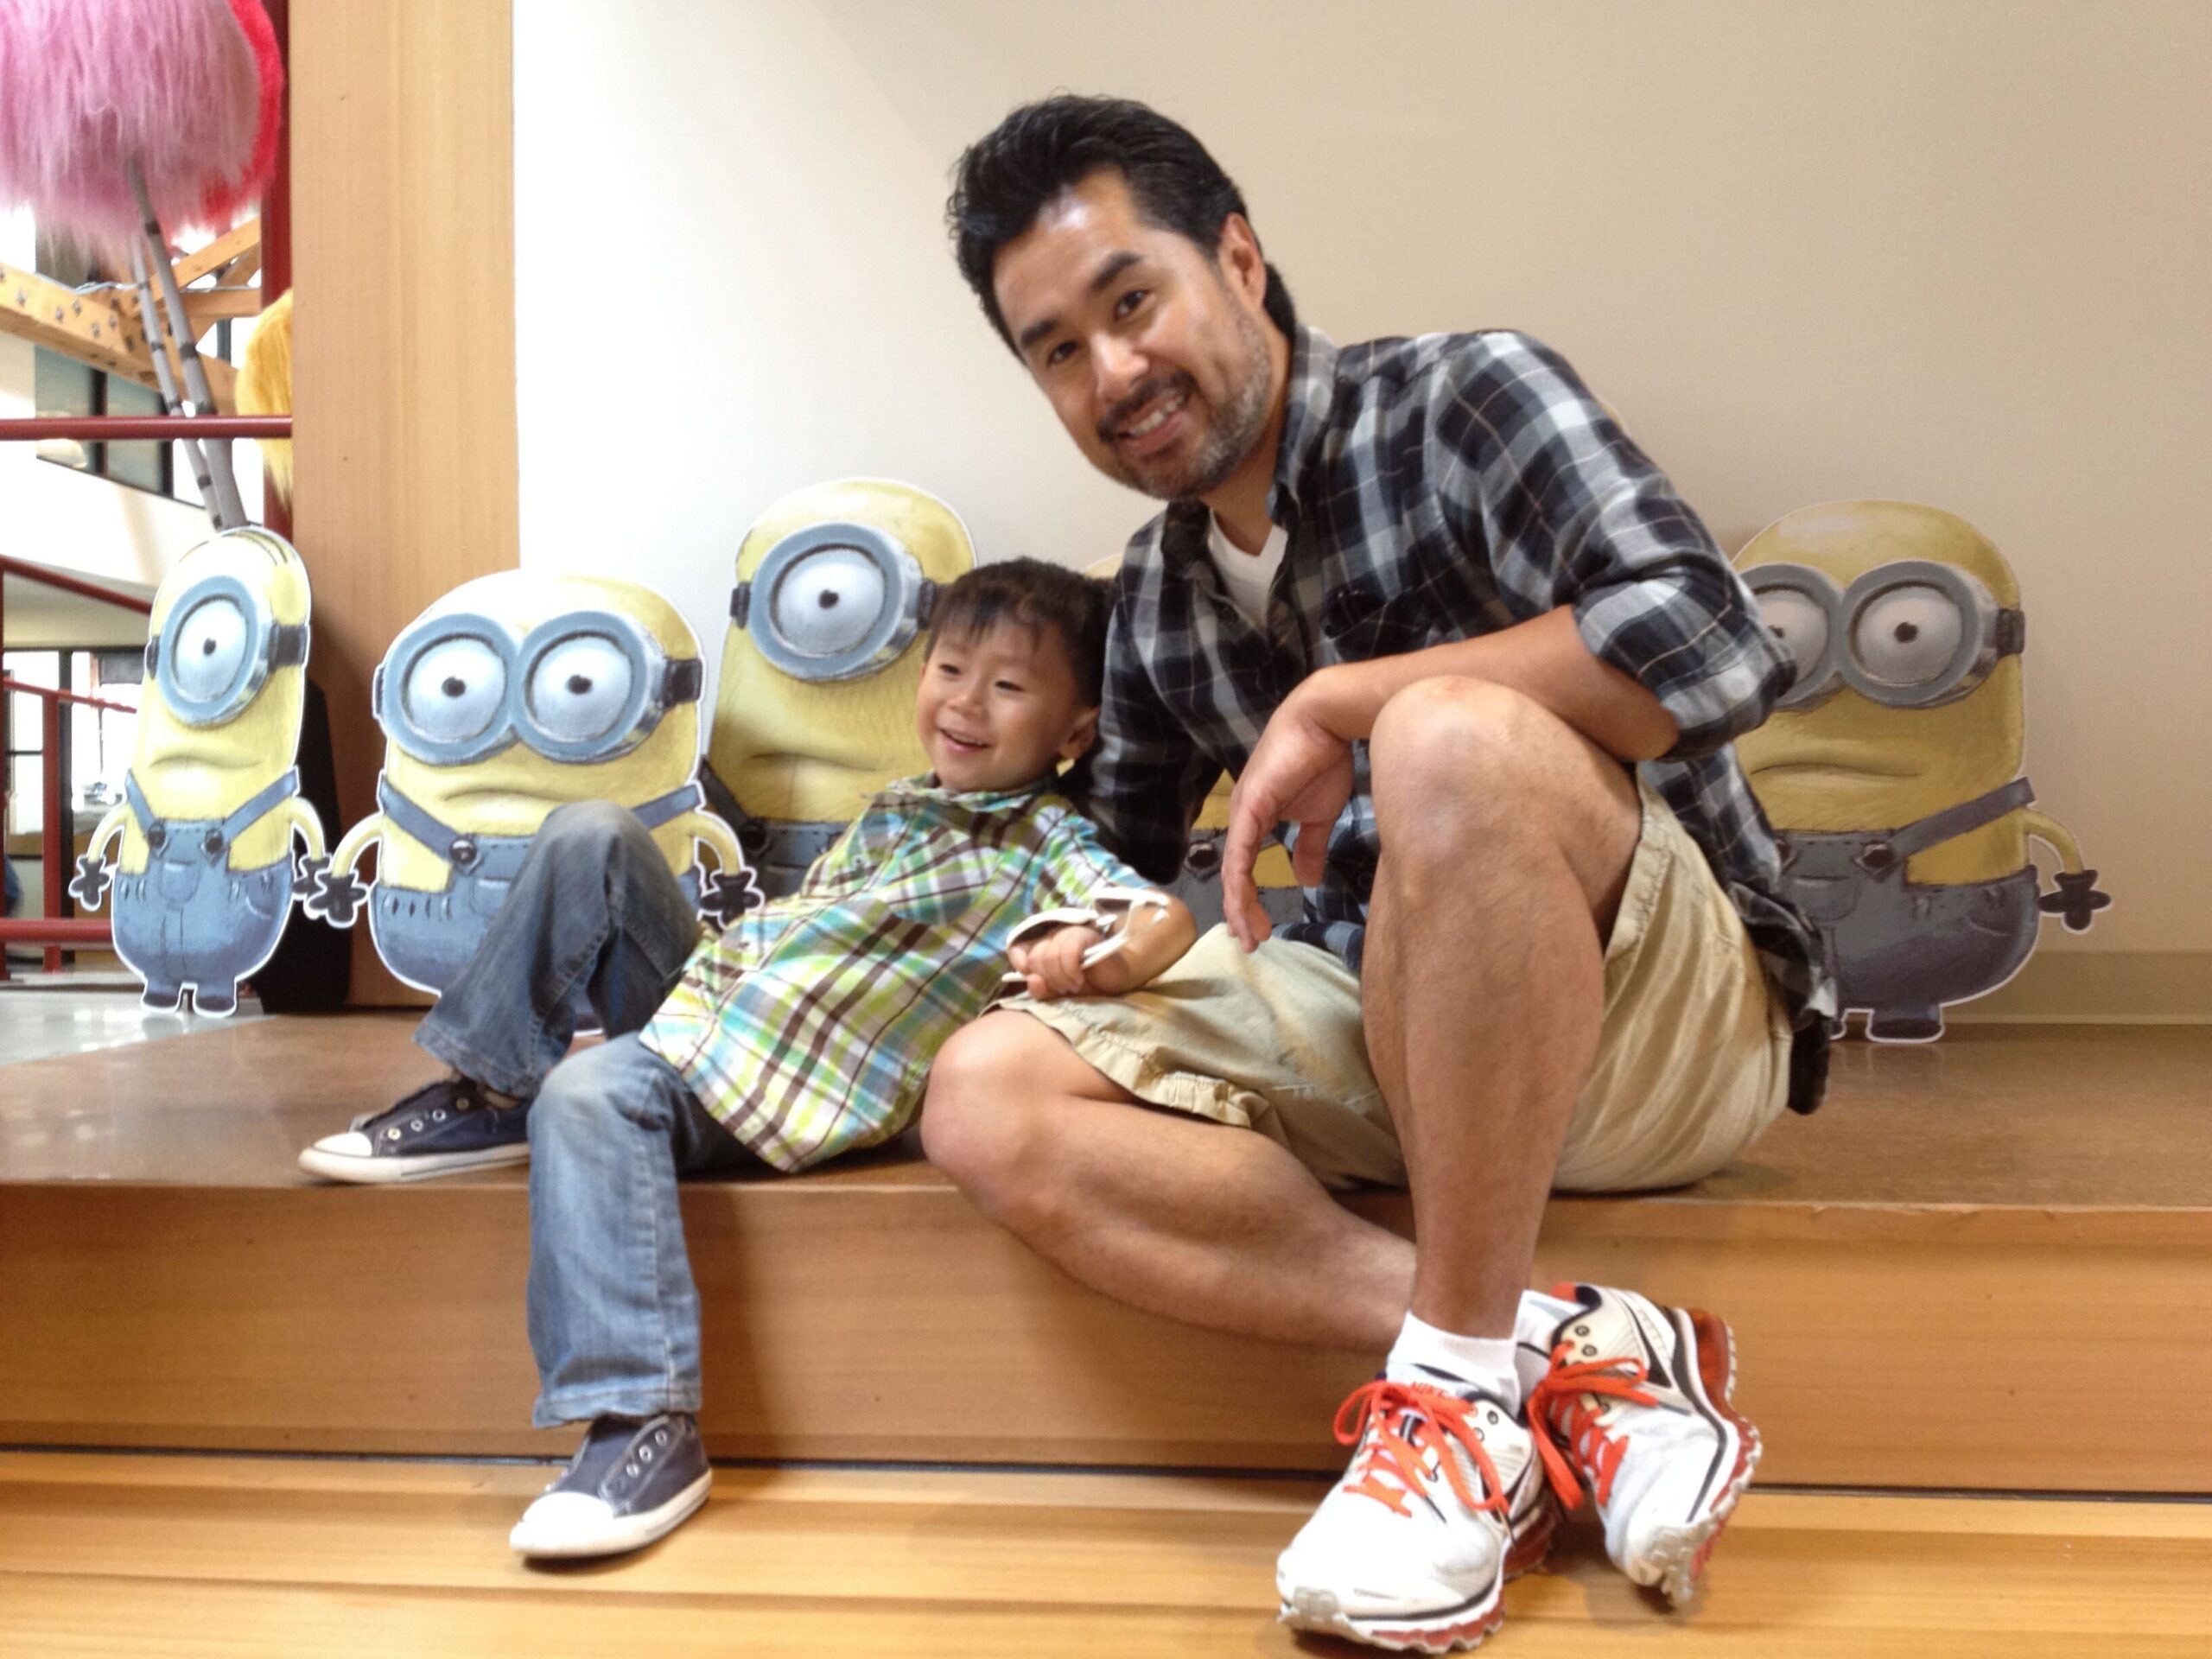 Sean Lee and his young son with the Minions.